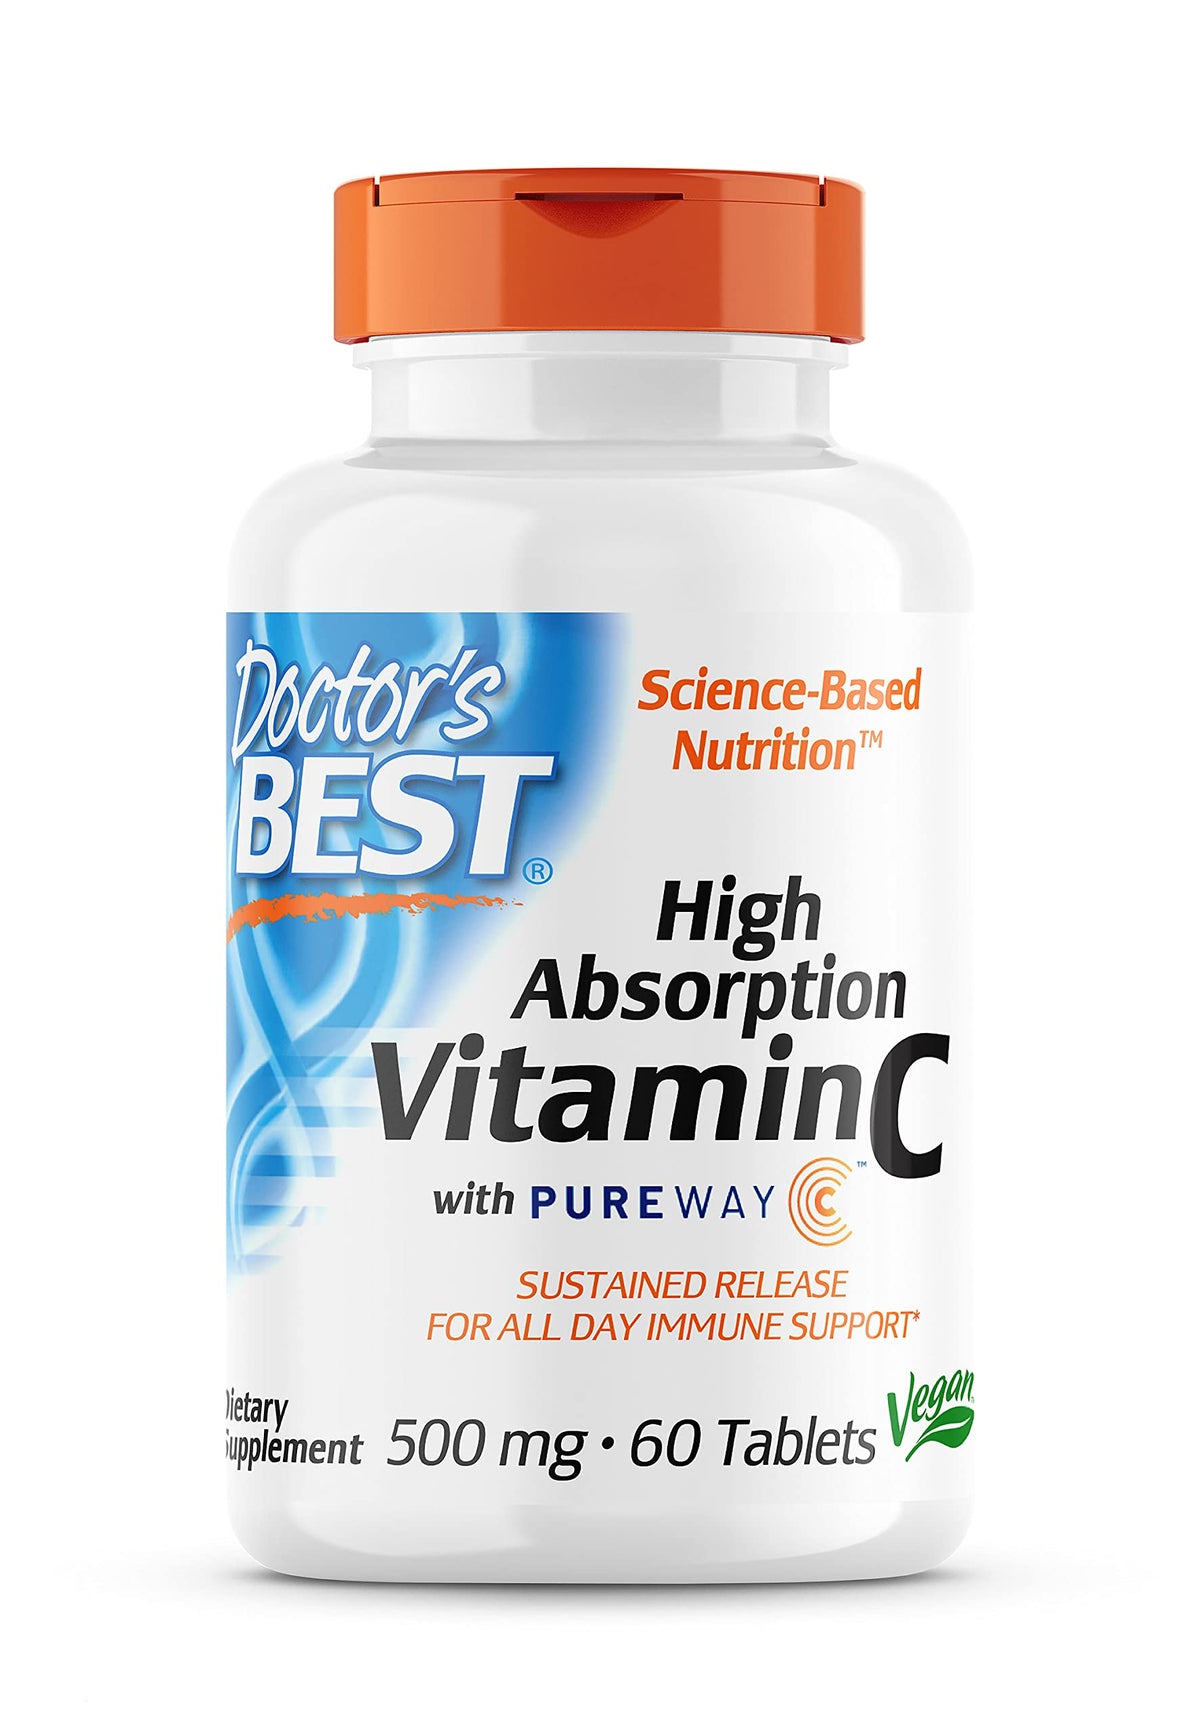 Sustained Release Vitamin C with PureWay-C, 500mg - Doctor's Best